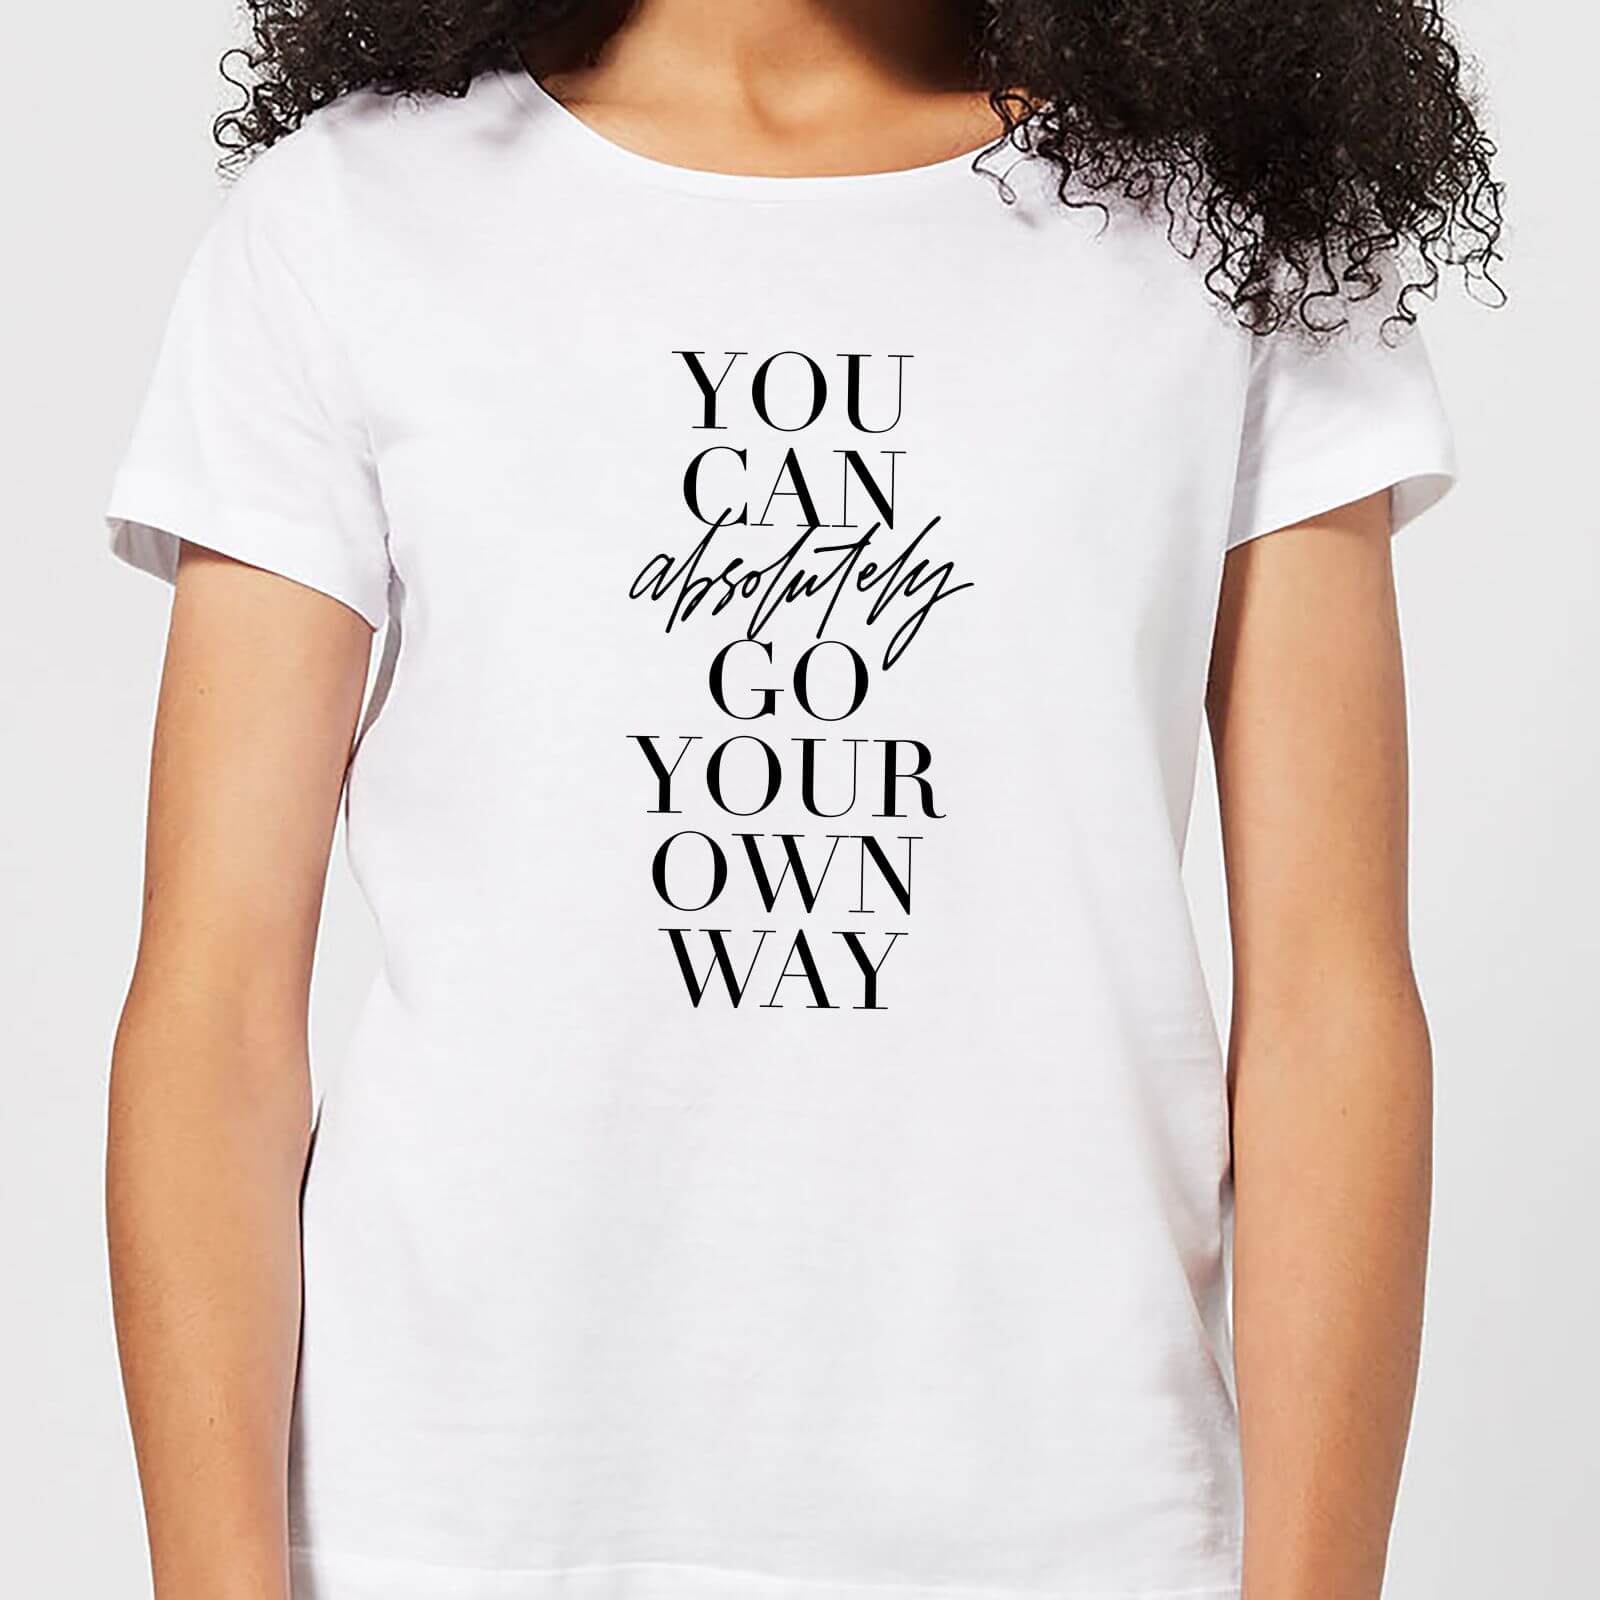 You Can Absolutely Go Your Own Way Women's T-Shirt - White - S - White